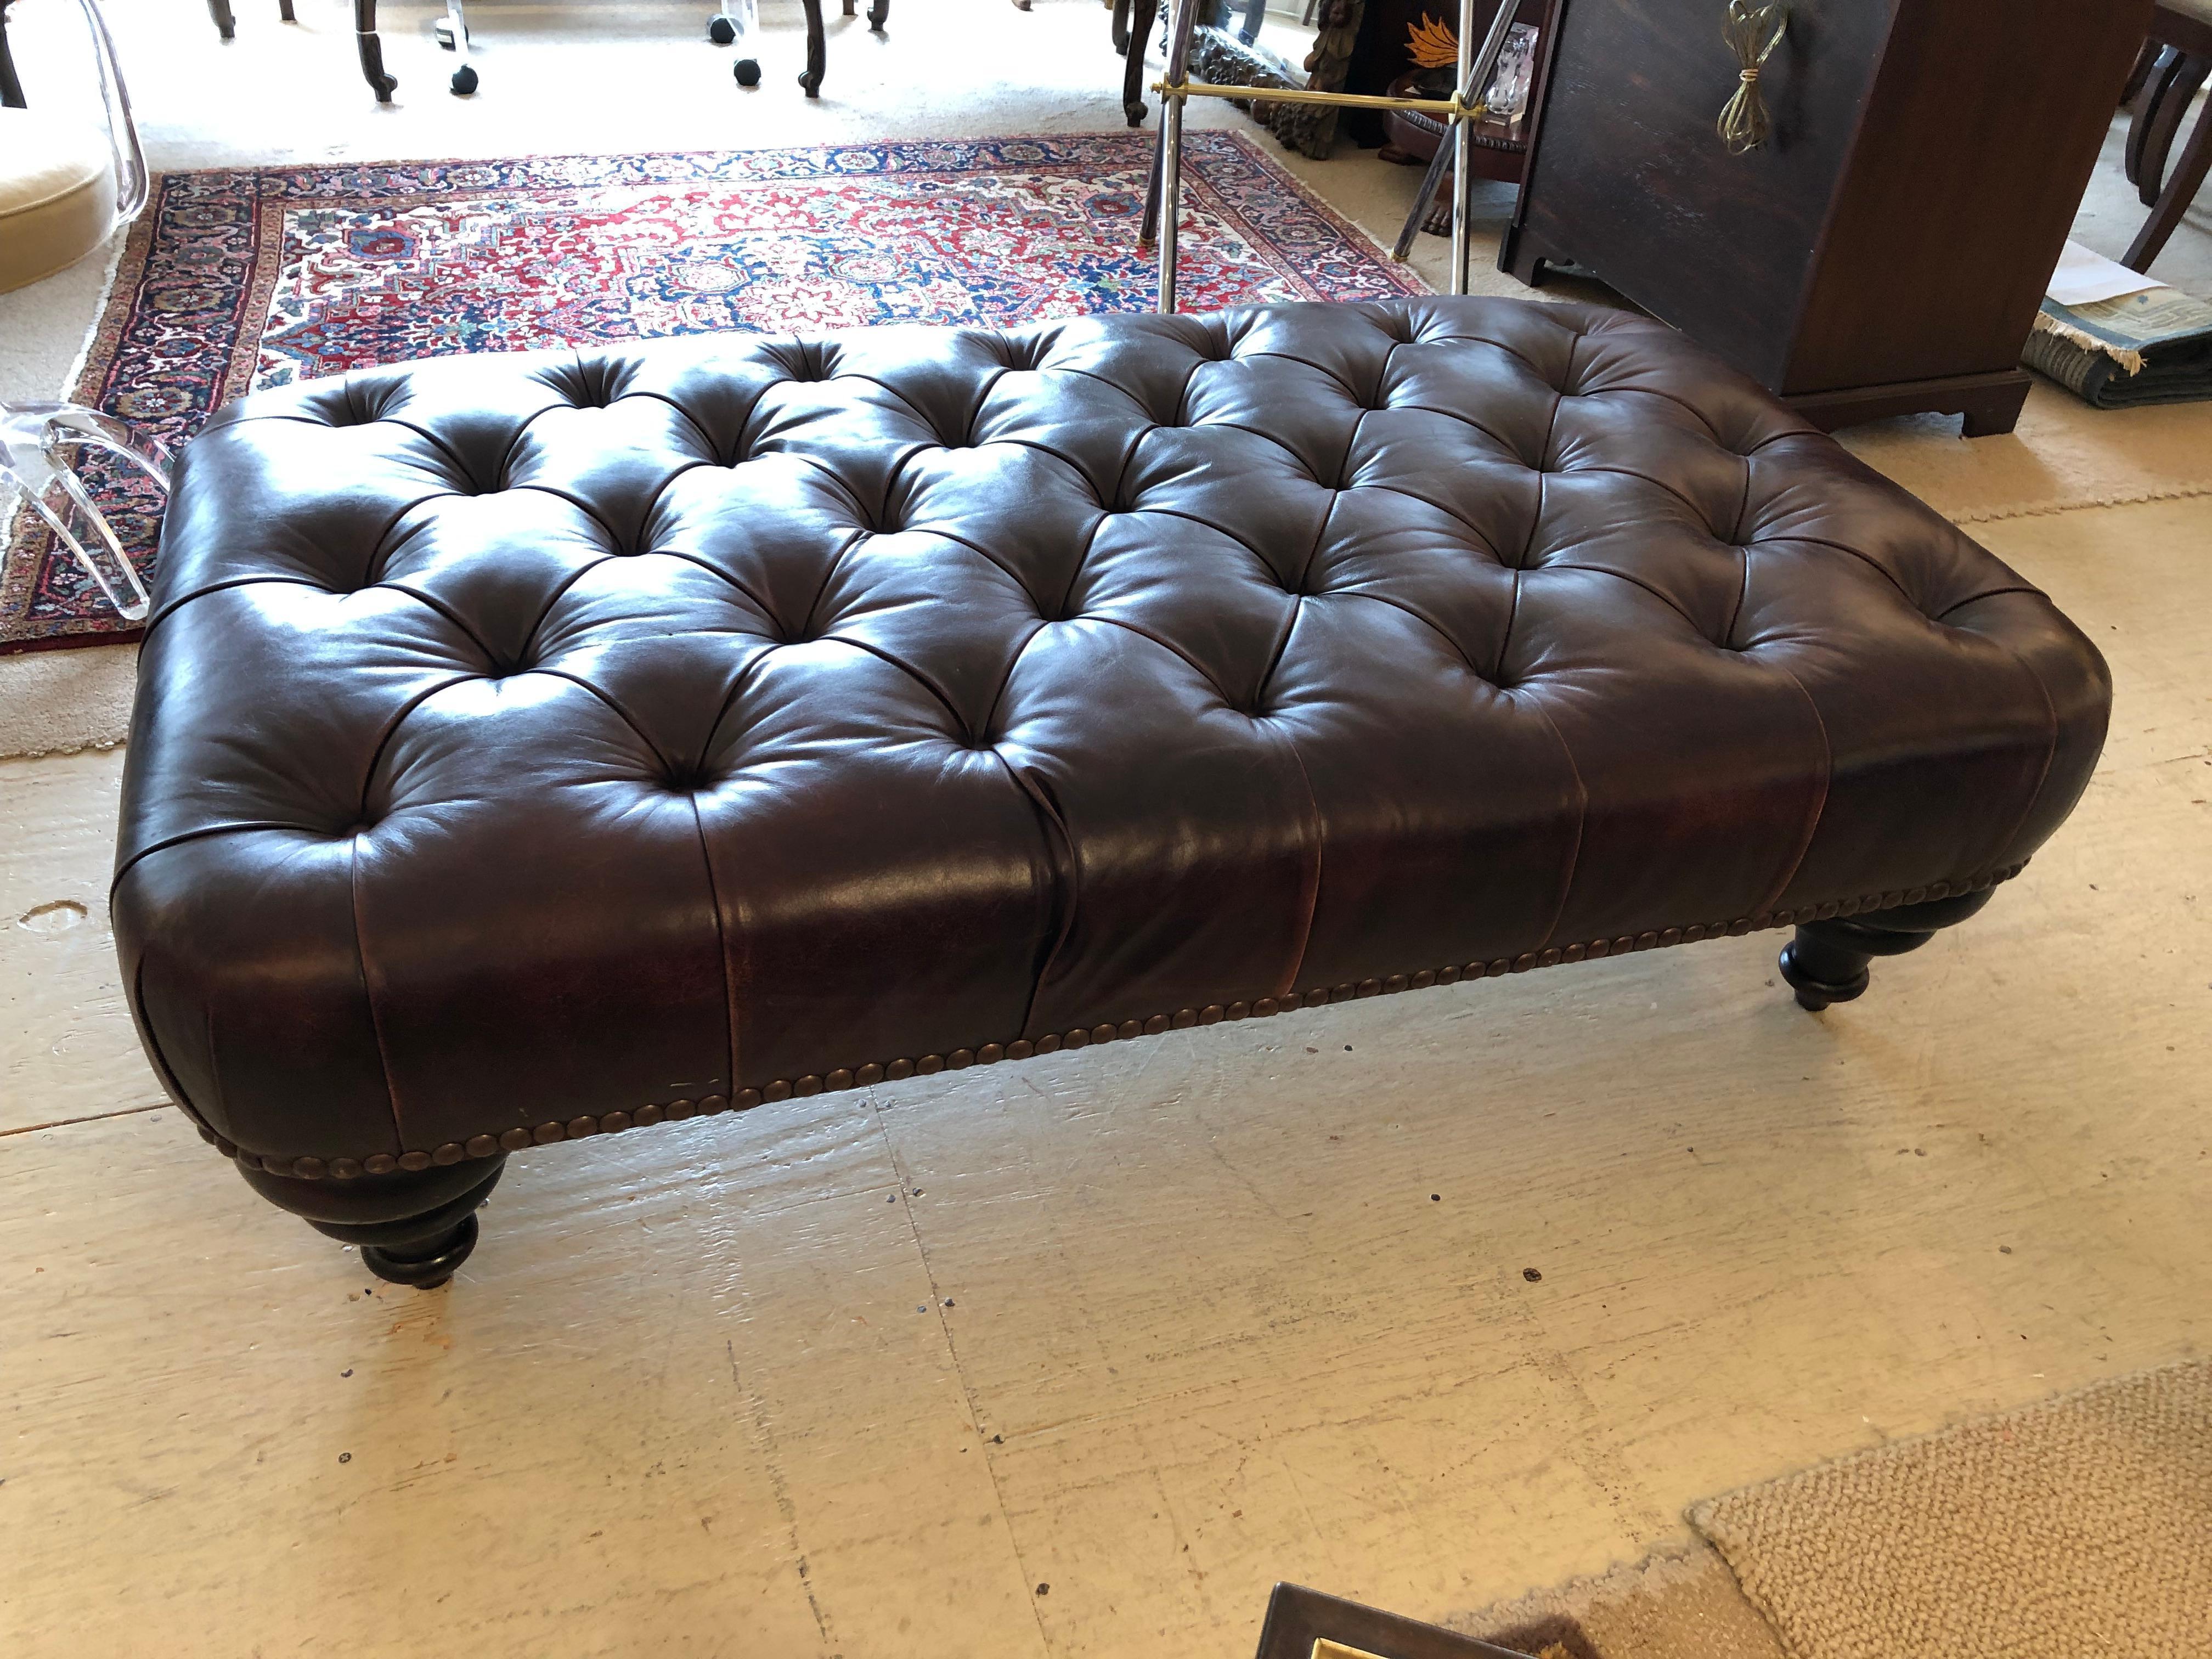  Tobacco Tufted Leather Chesterfield Style George Smith Ottoman Coffee Table 1